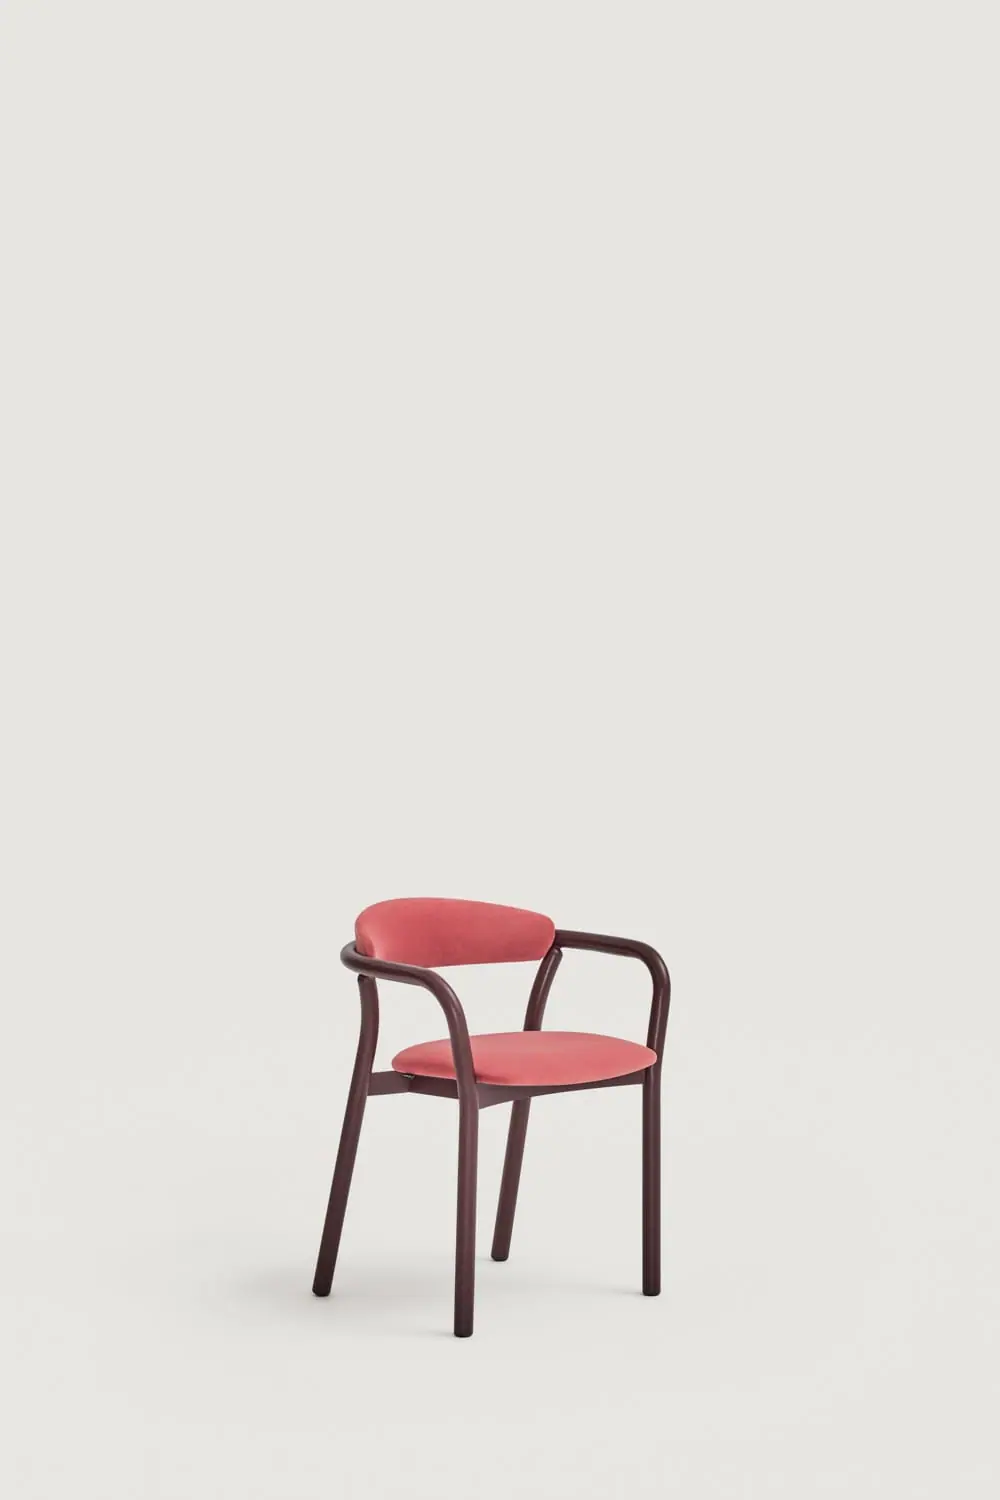 capdell-cecile-chair-03